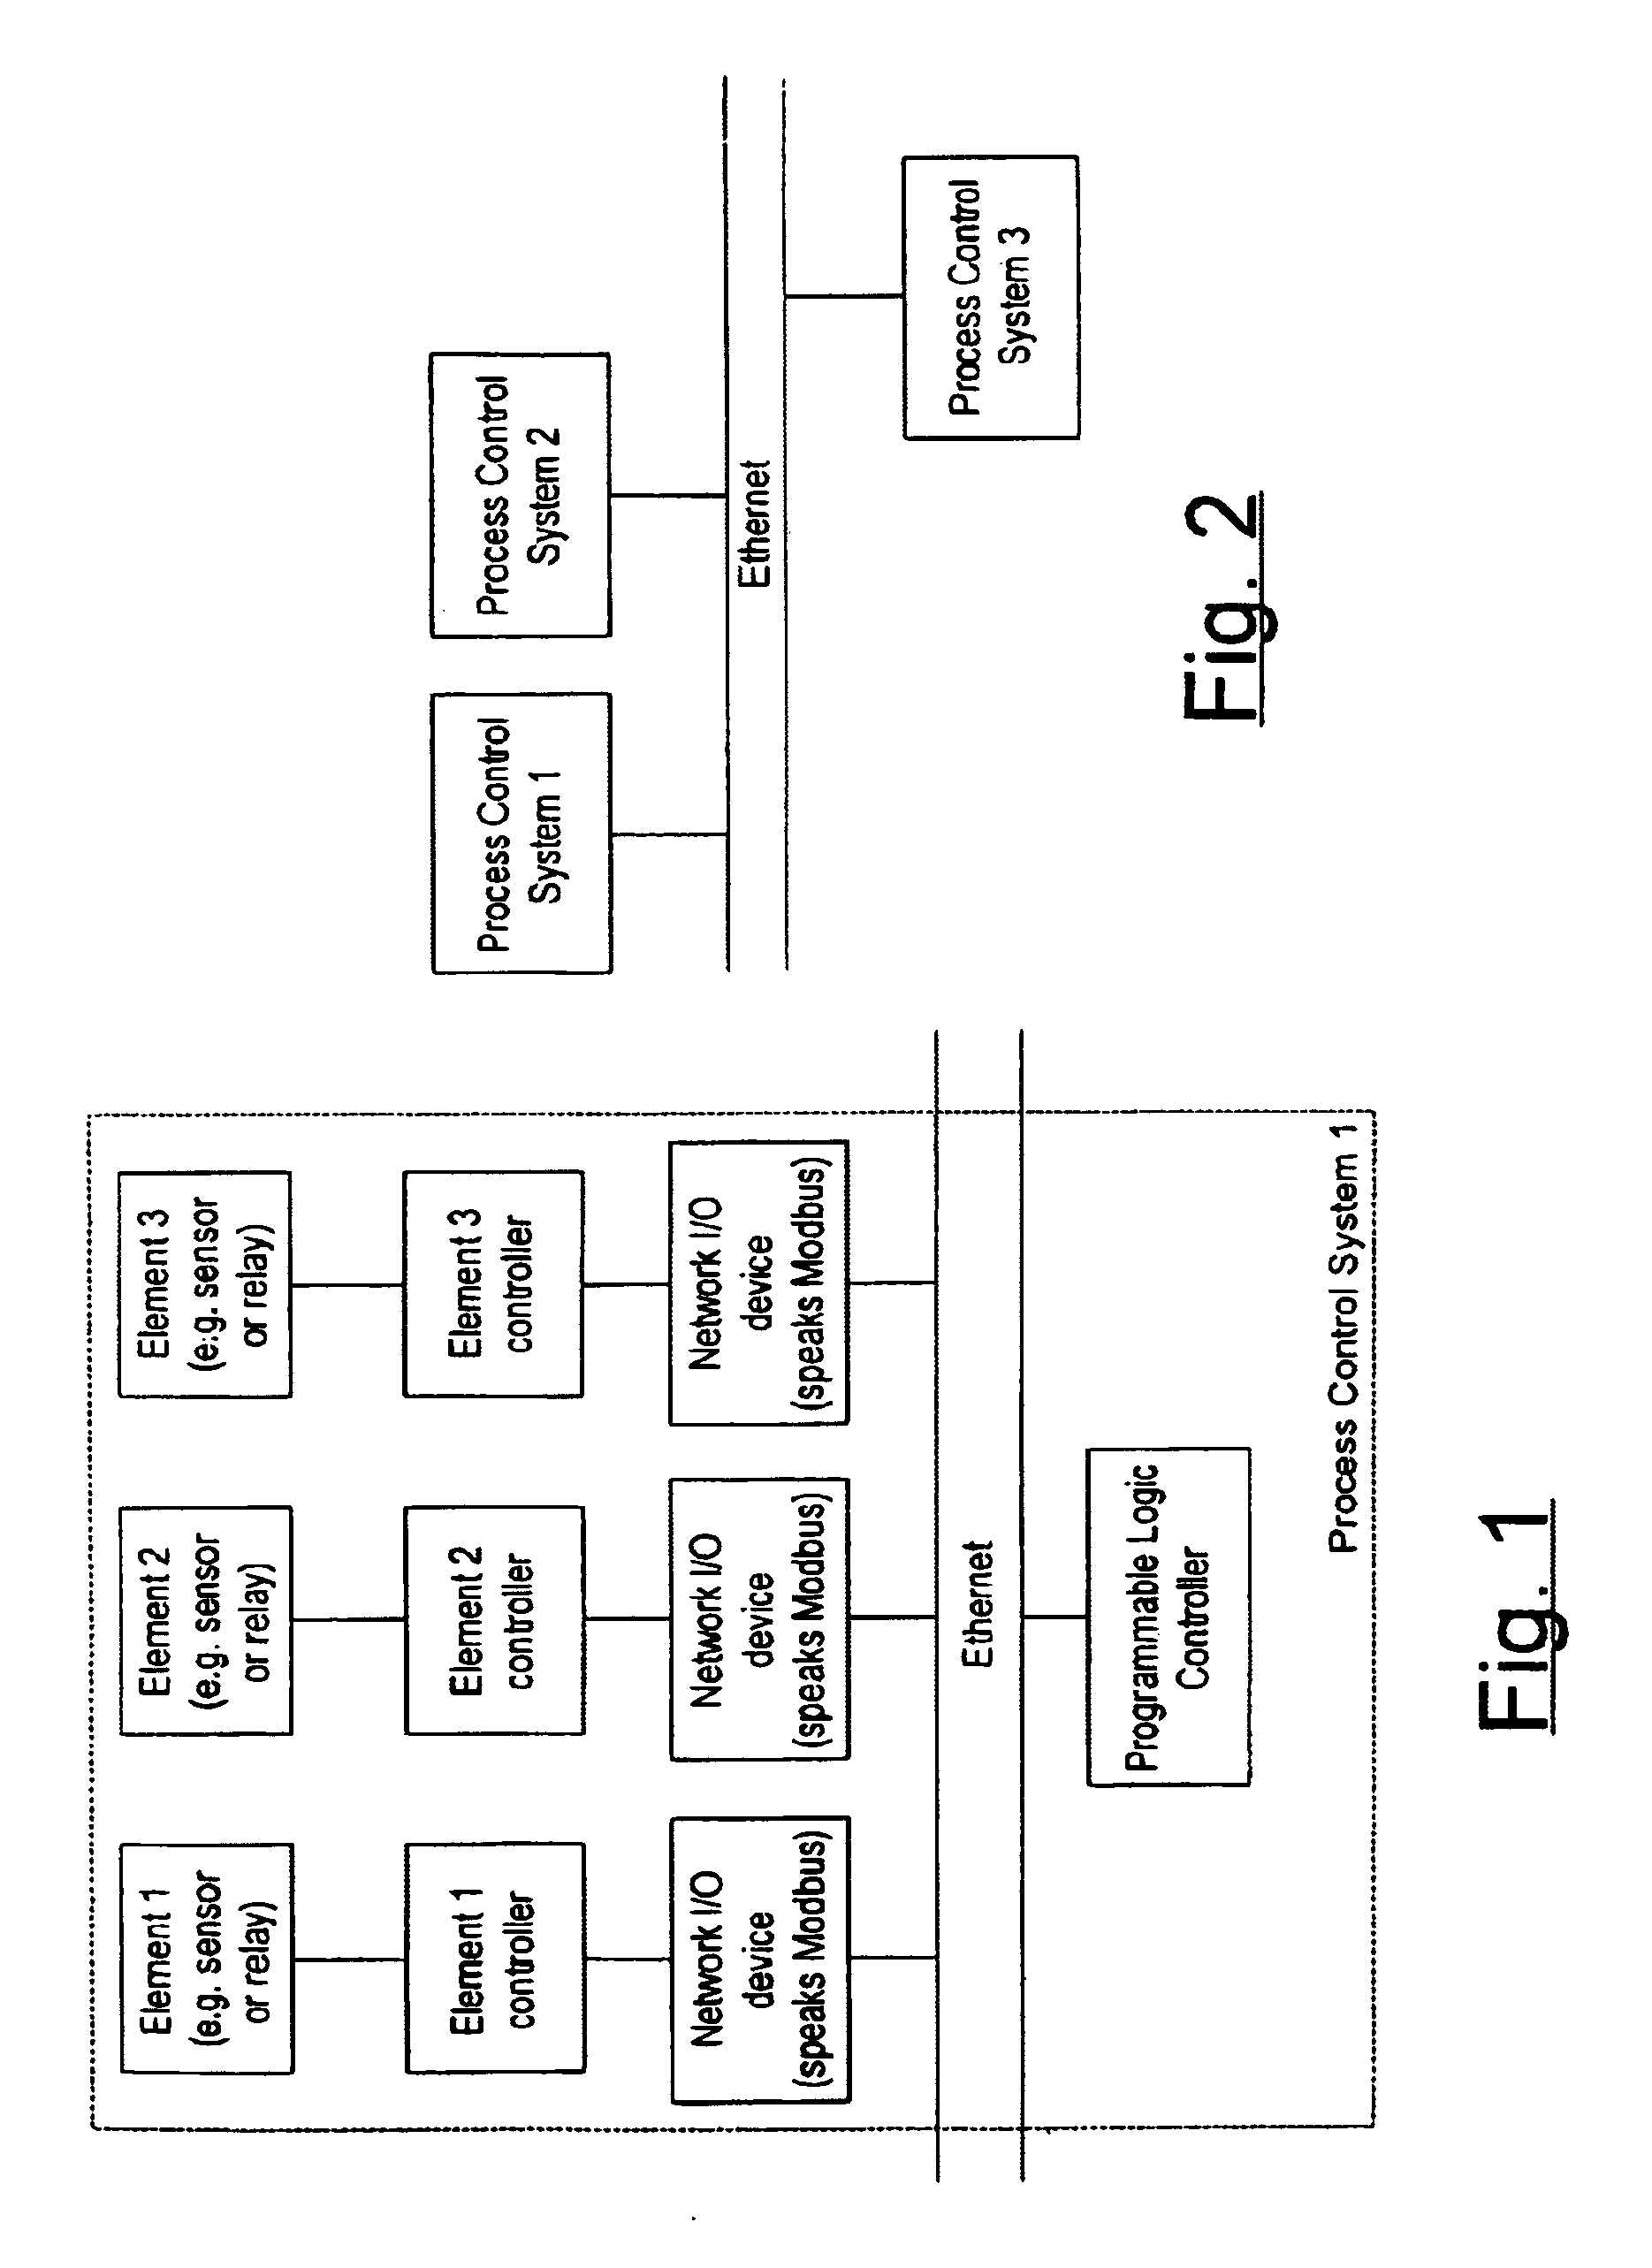 Method for adapting a computer-to-computer communication protocol for use in an industrial control system